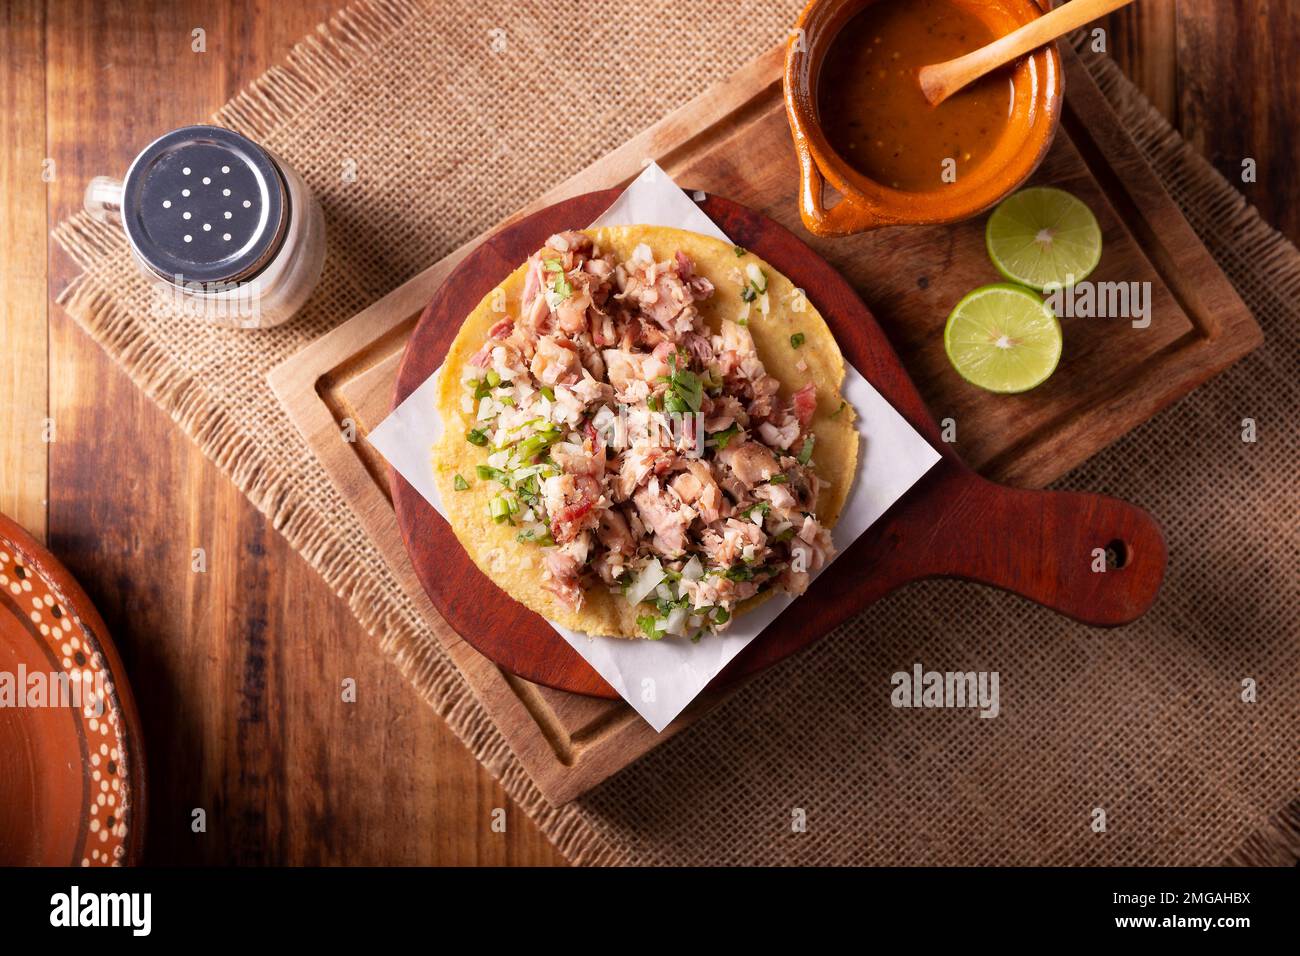 Taco de Carnitas. Cornmeal tortilla with deep fried pork. Traditional Mexican appetizer commonly accompanied by cilantro, onion and hot sauce. Stock Photo